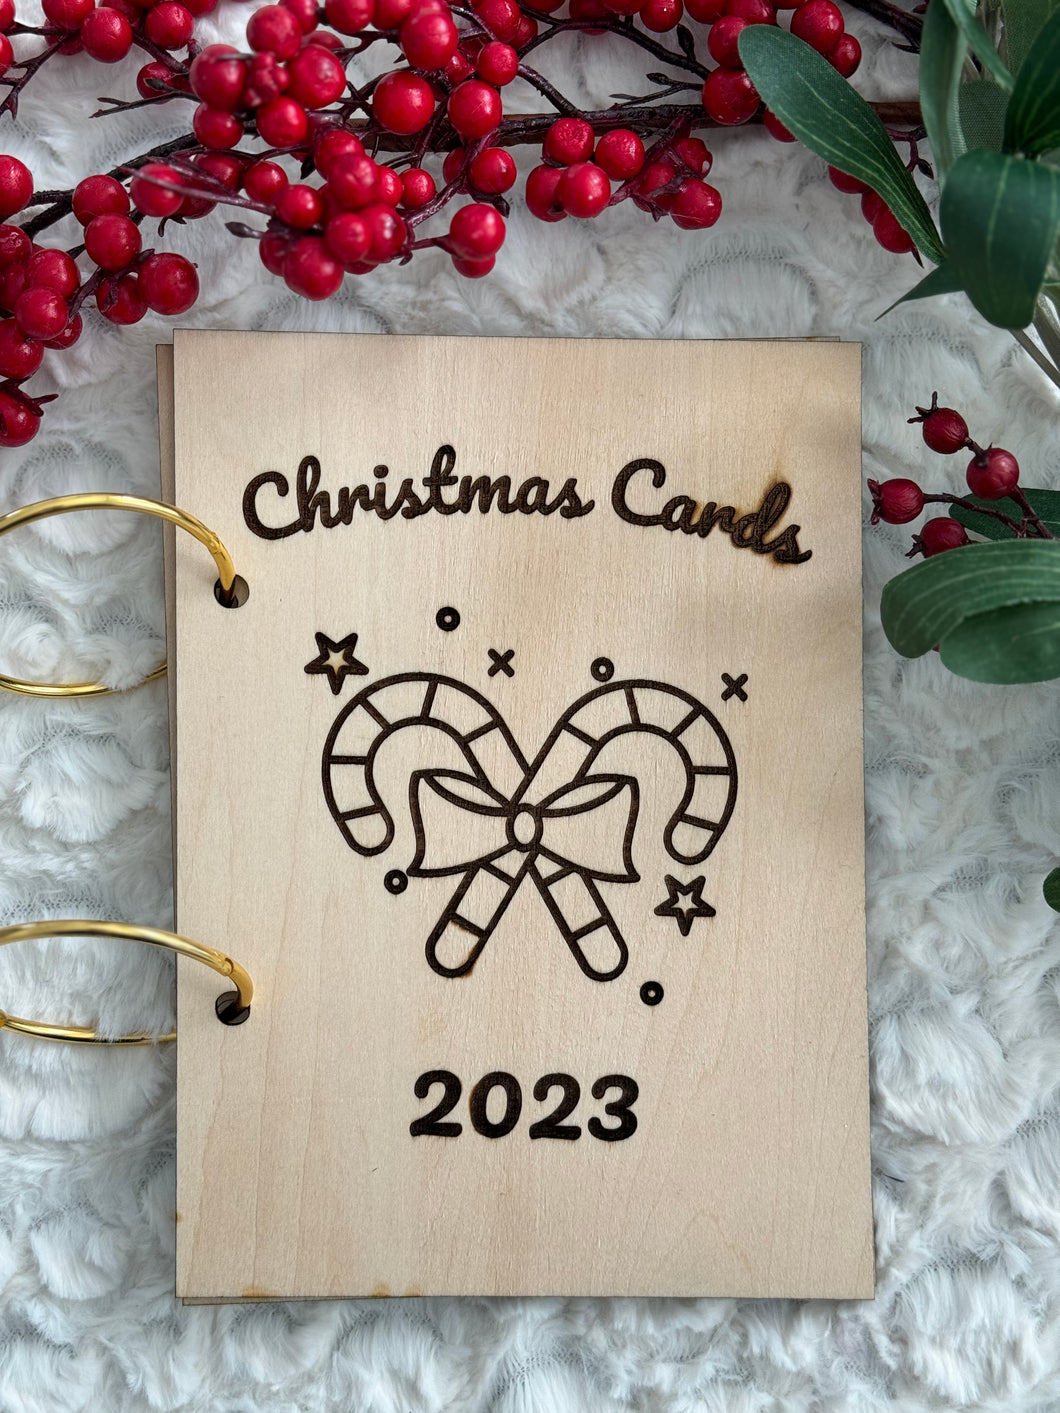 Candy Canes Christmas 2023 Card Holder